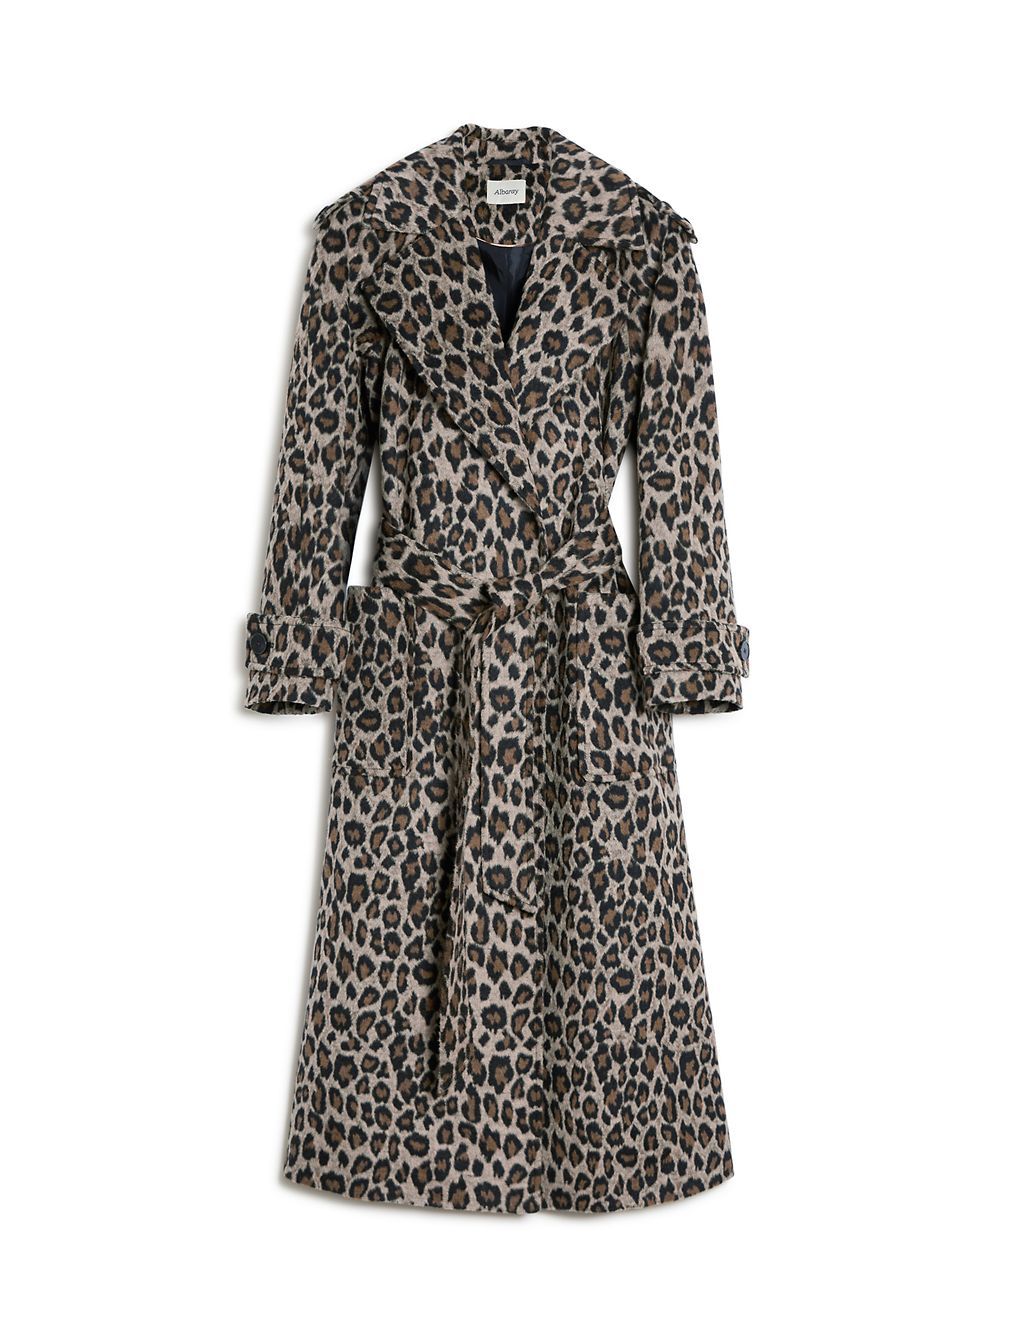 18 of the best trench coats for women